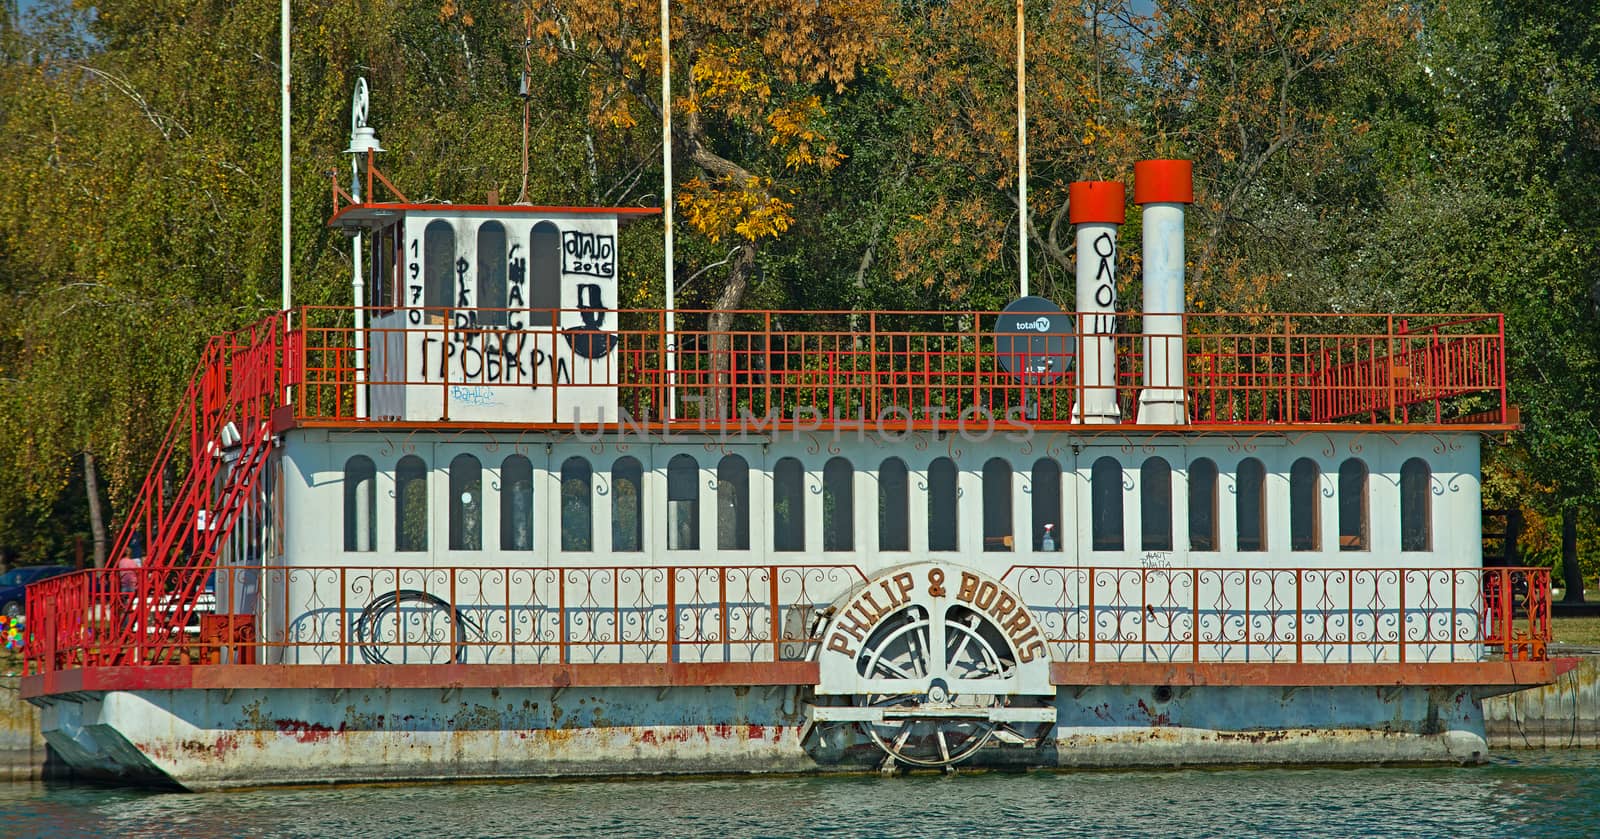 PALIC, SERBIA - October 13th 2018 - side view on a white and red raft that look like a boat